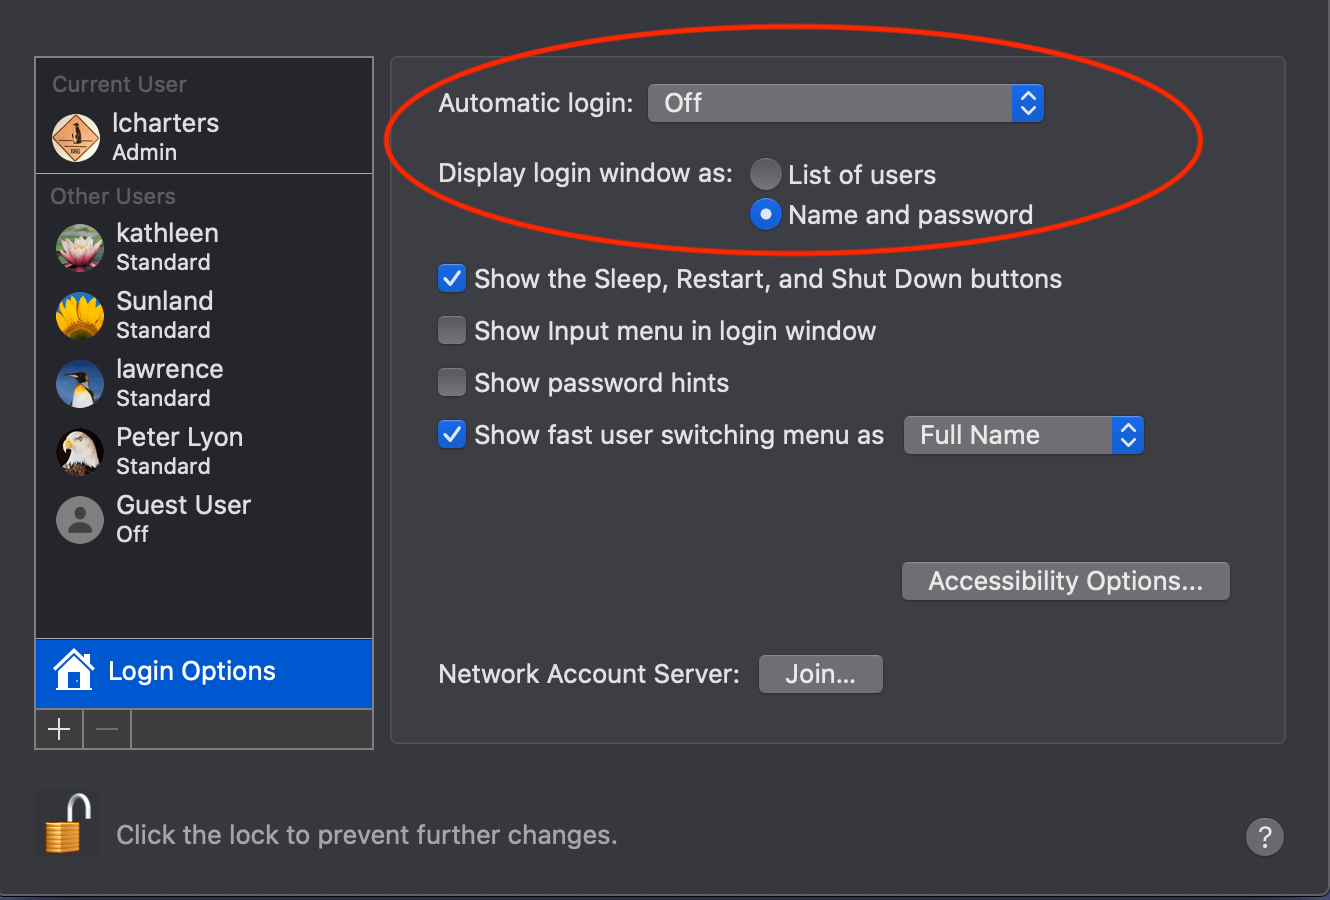 Set login options to prohibit automatic login, and prompt for the user name and password.